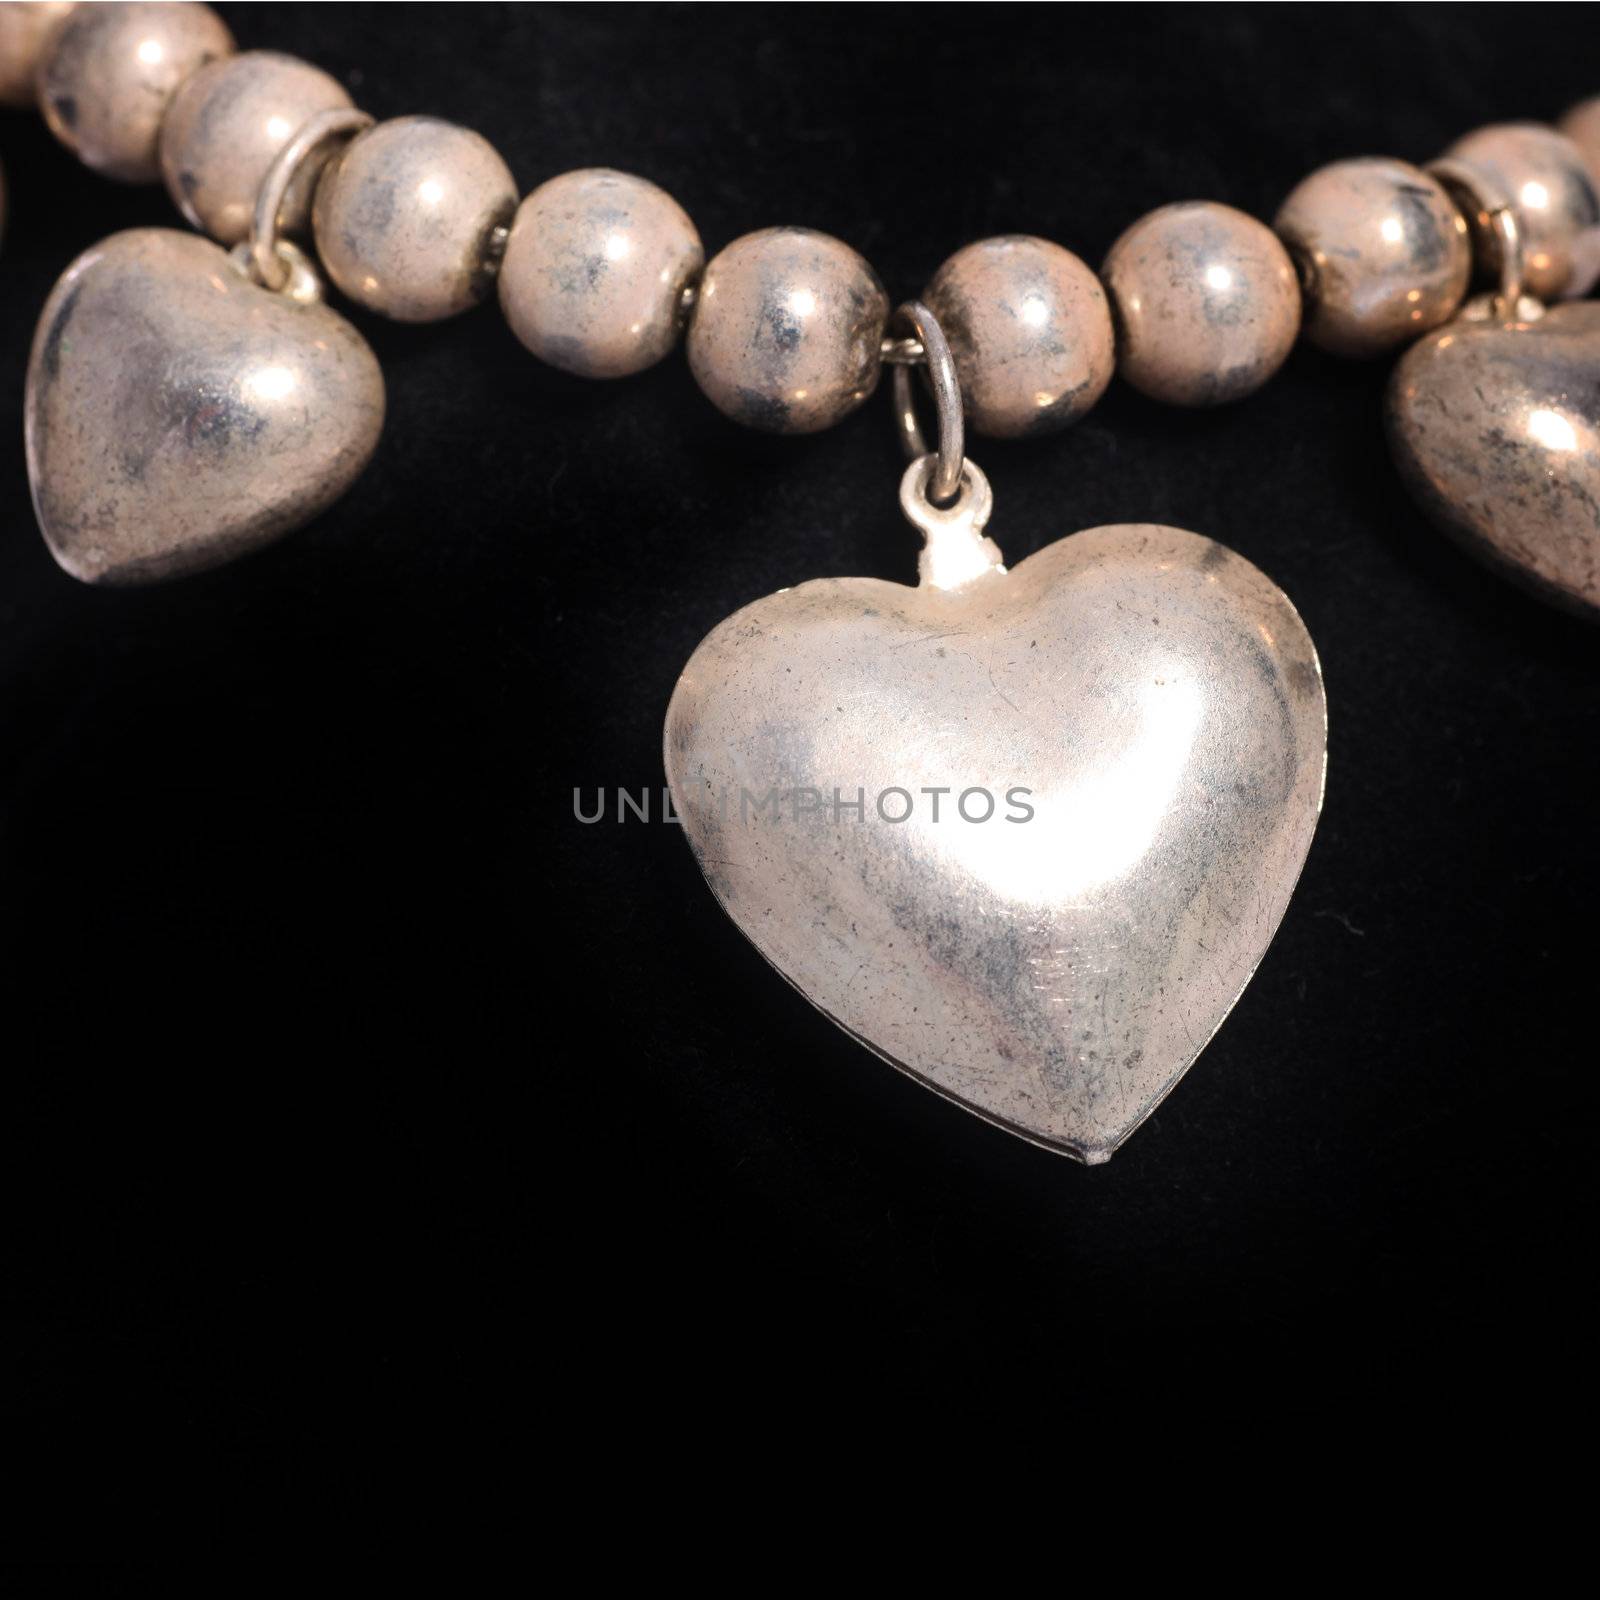 Necklace with a silver heart by Farina6000